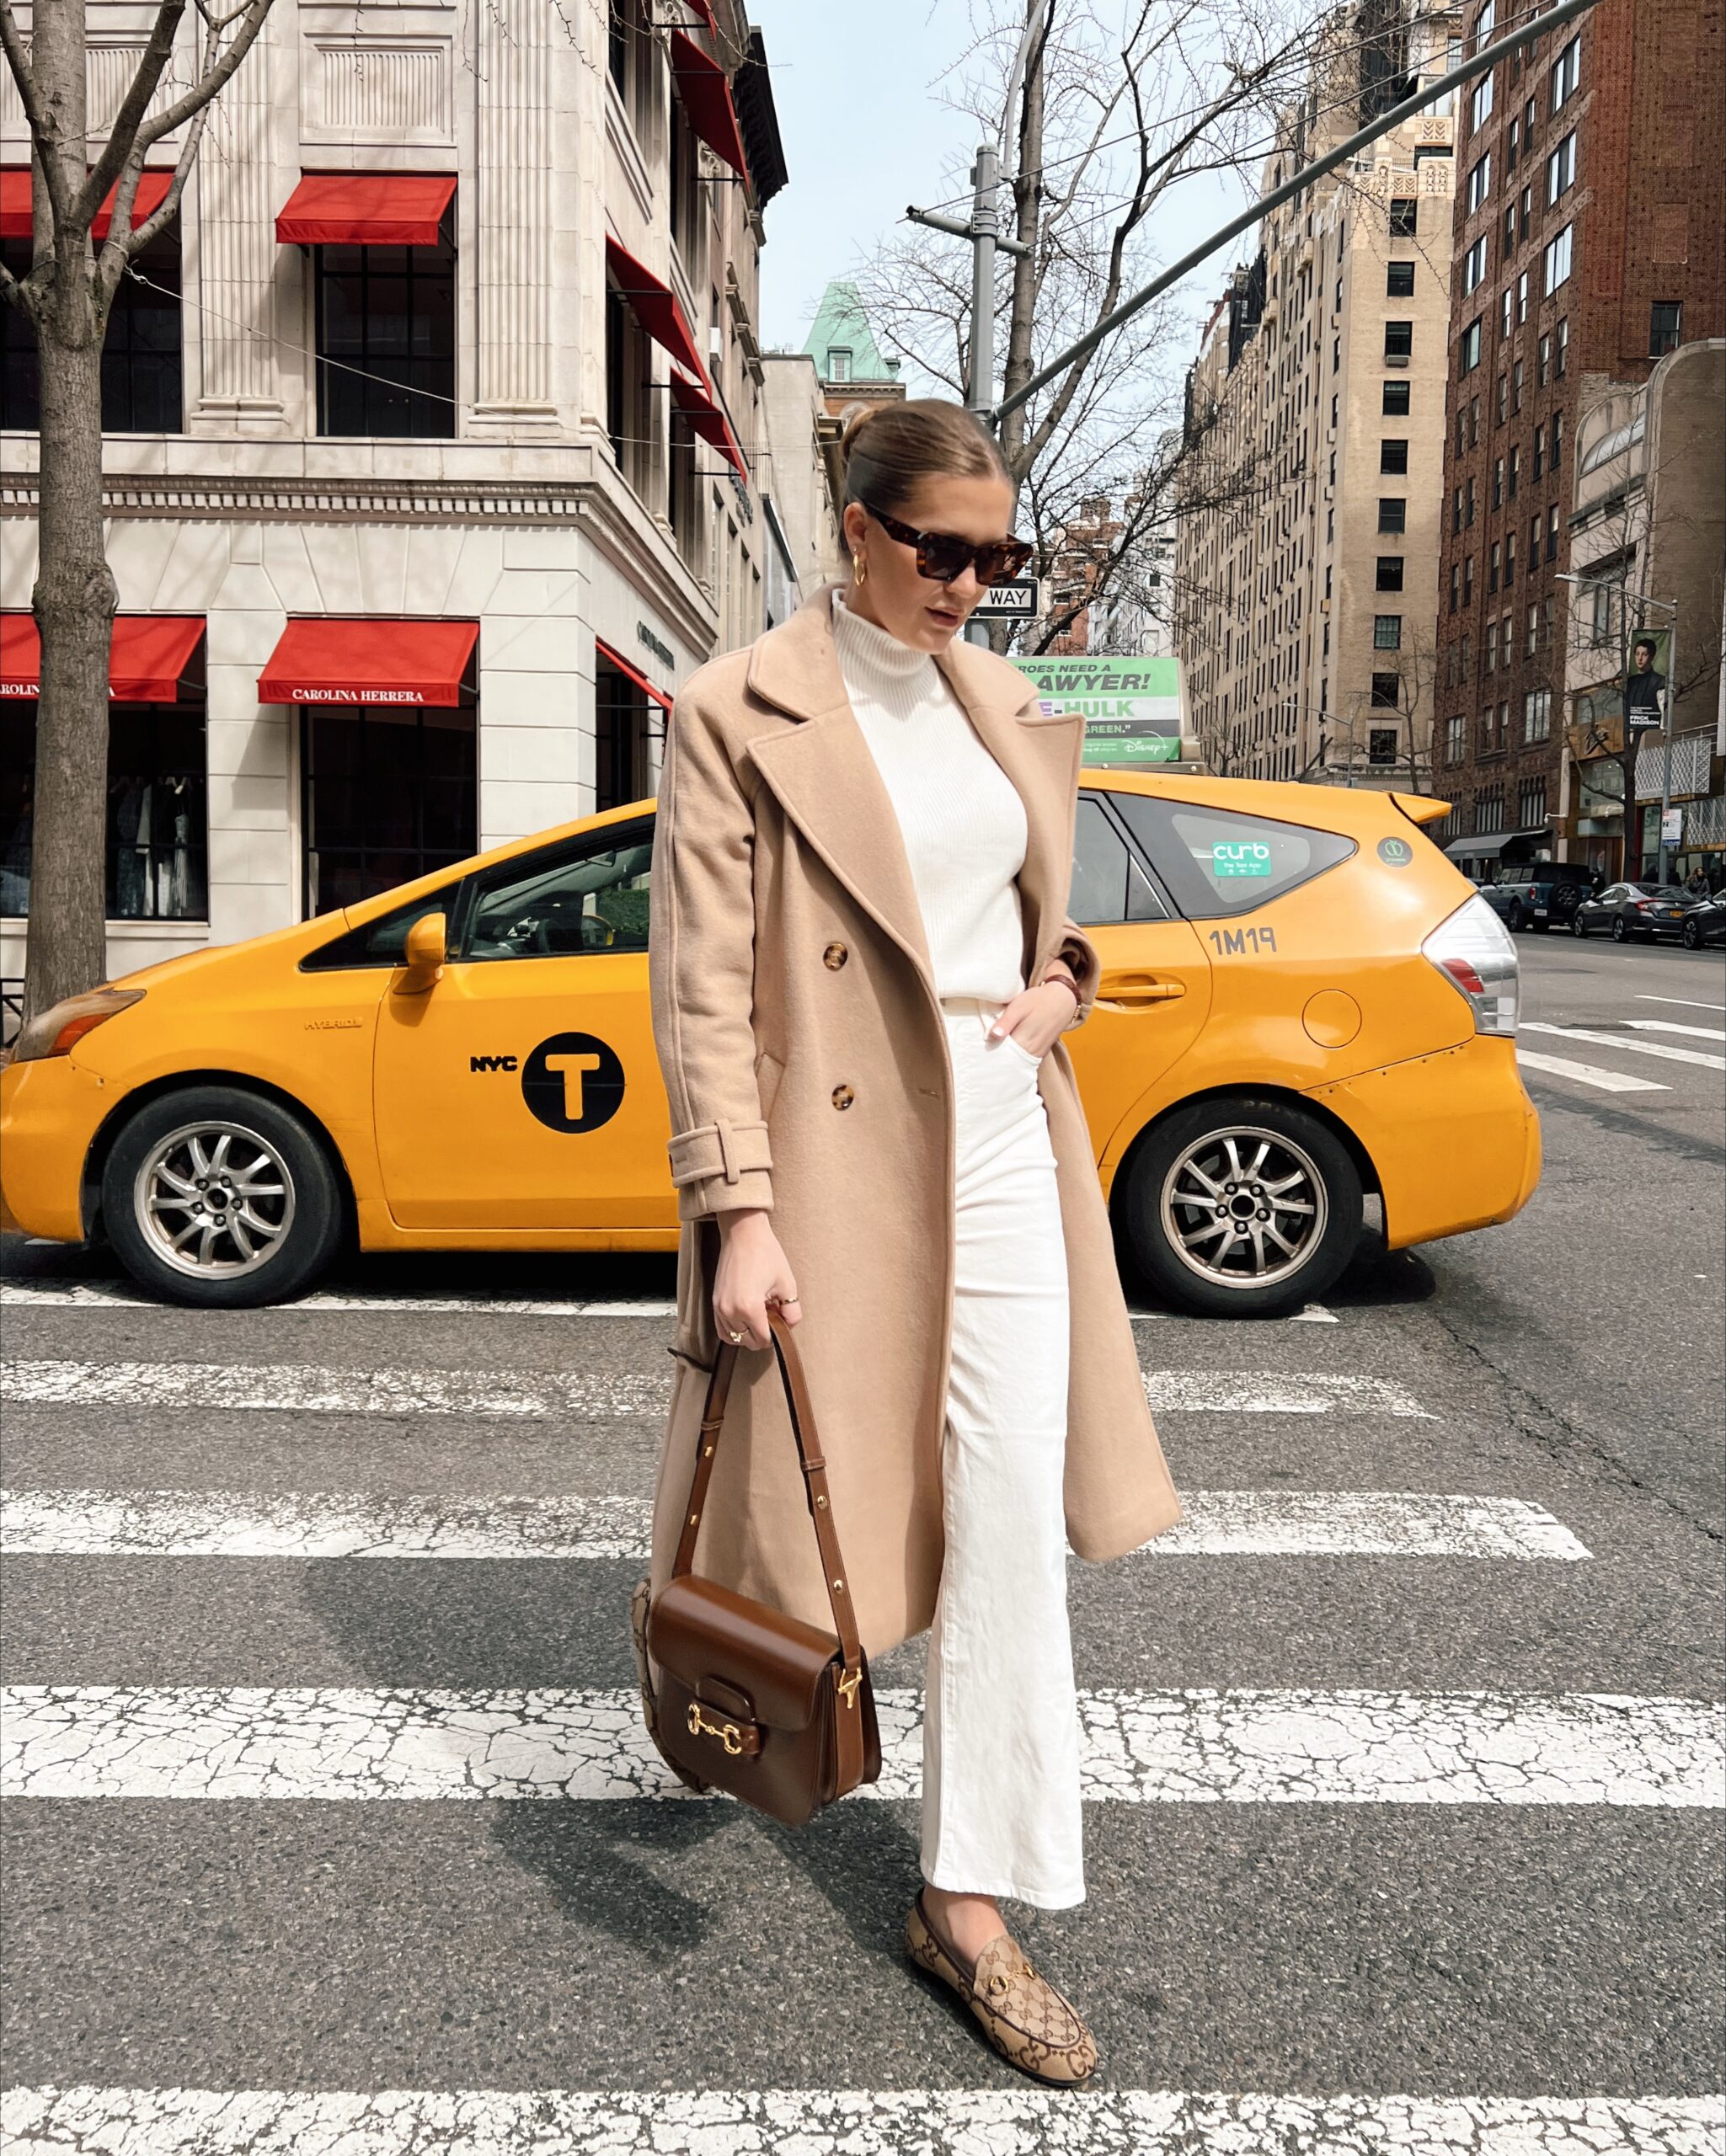 Anna walking in a trench coat in front of a yellow taxi in New York City.